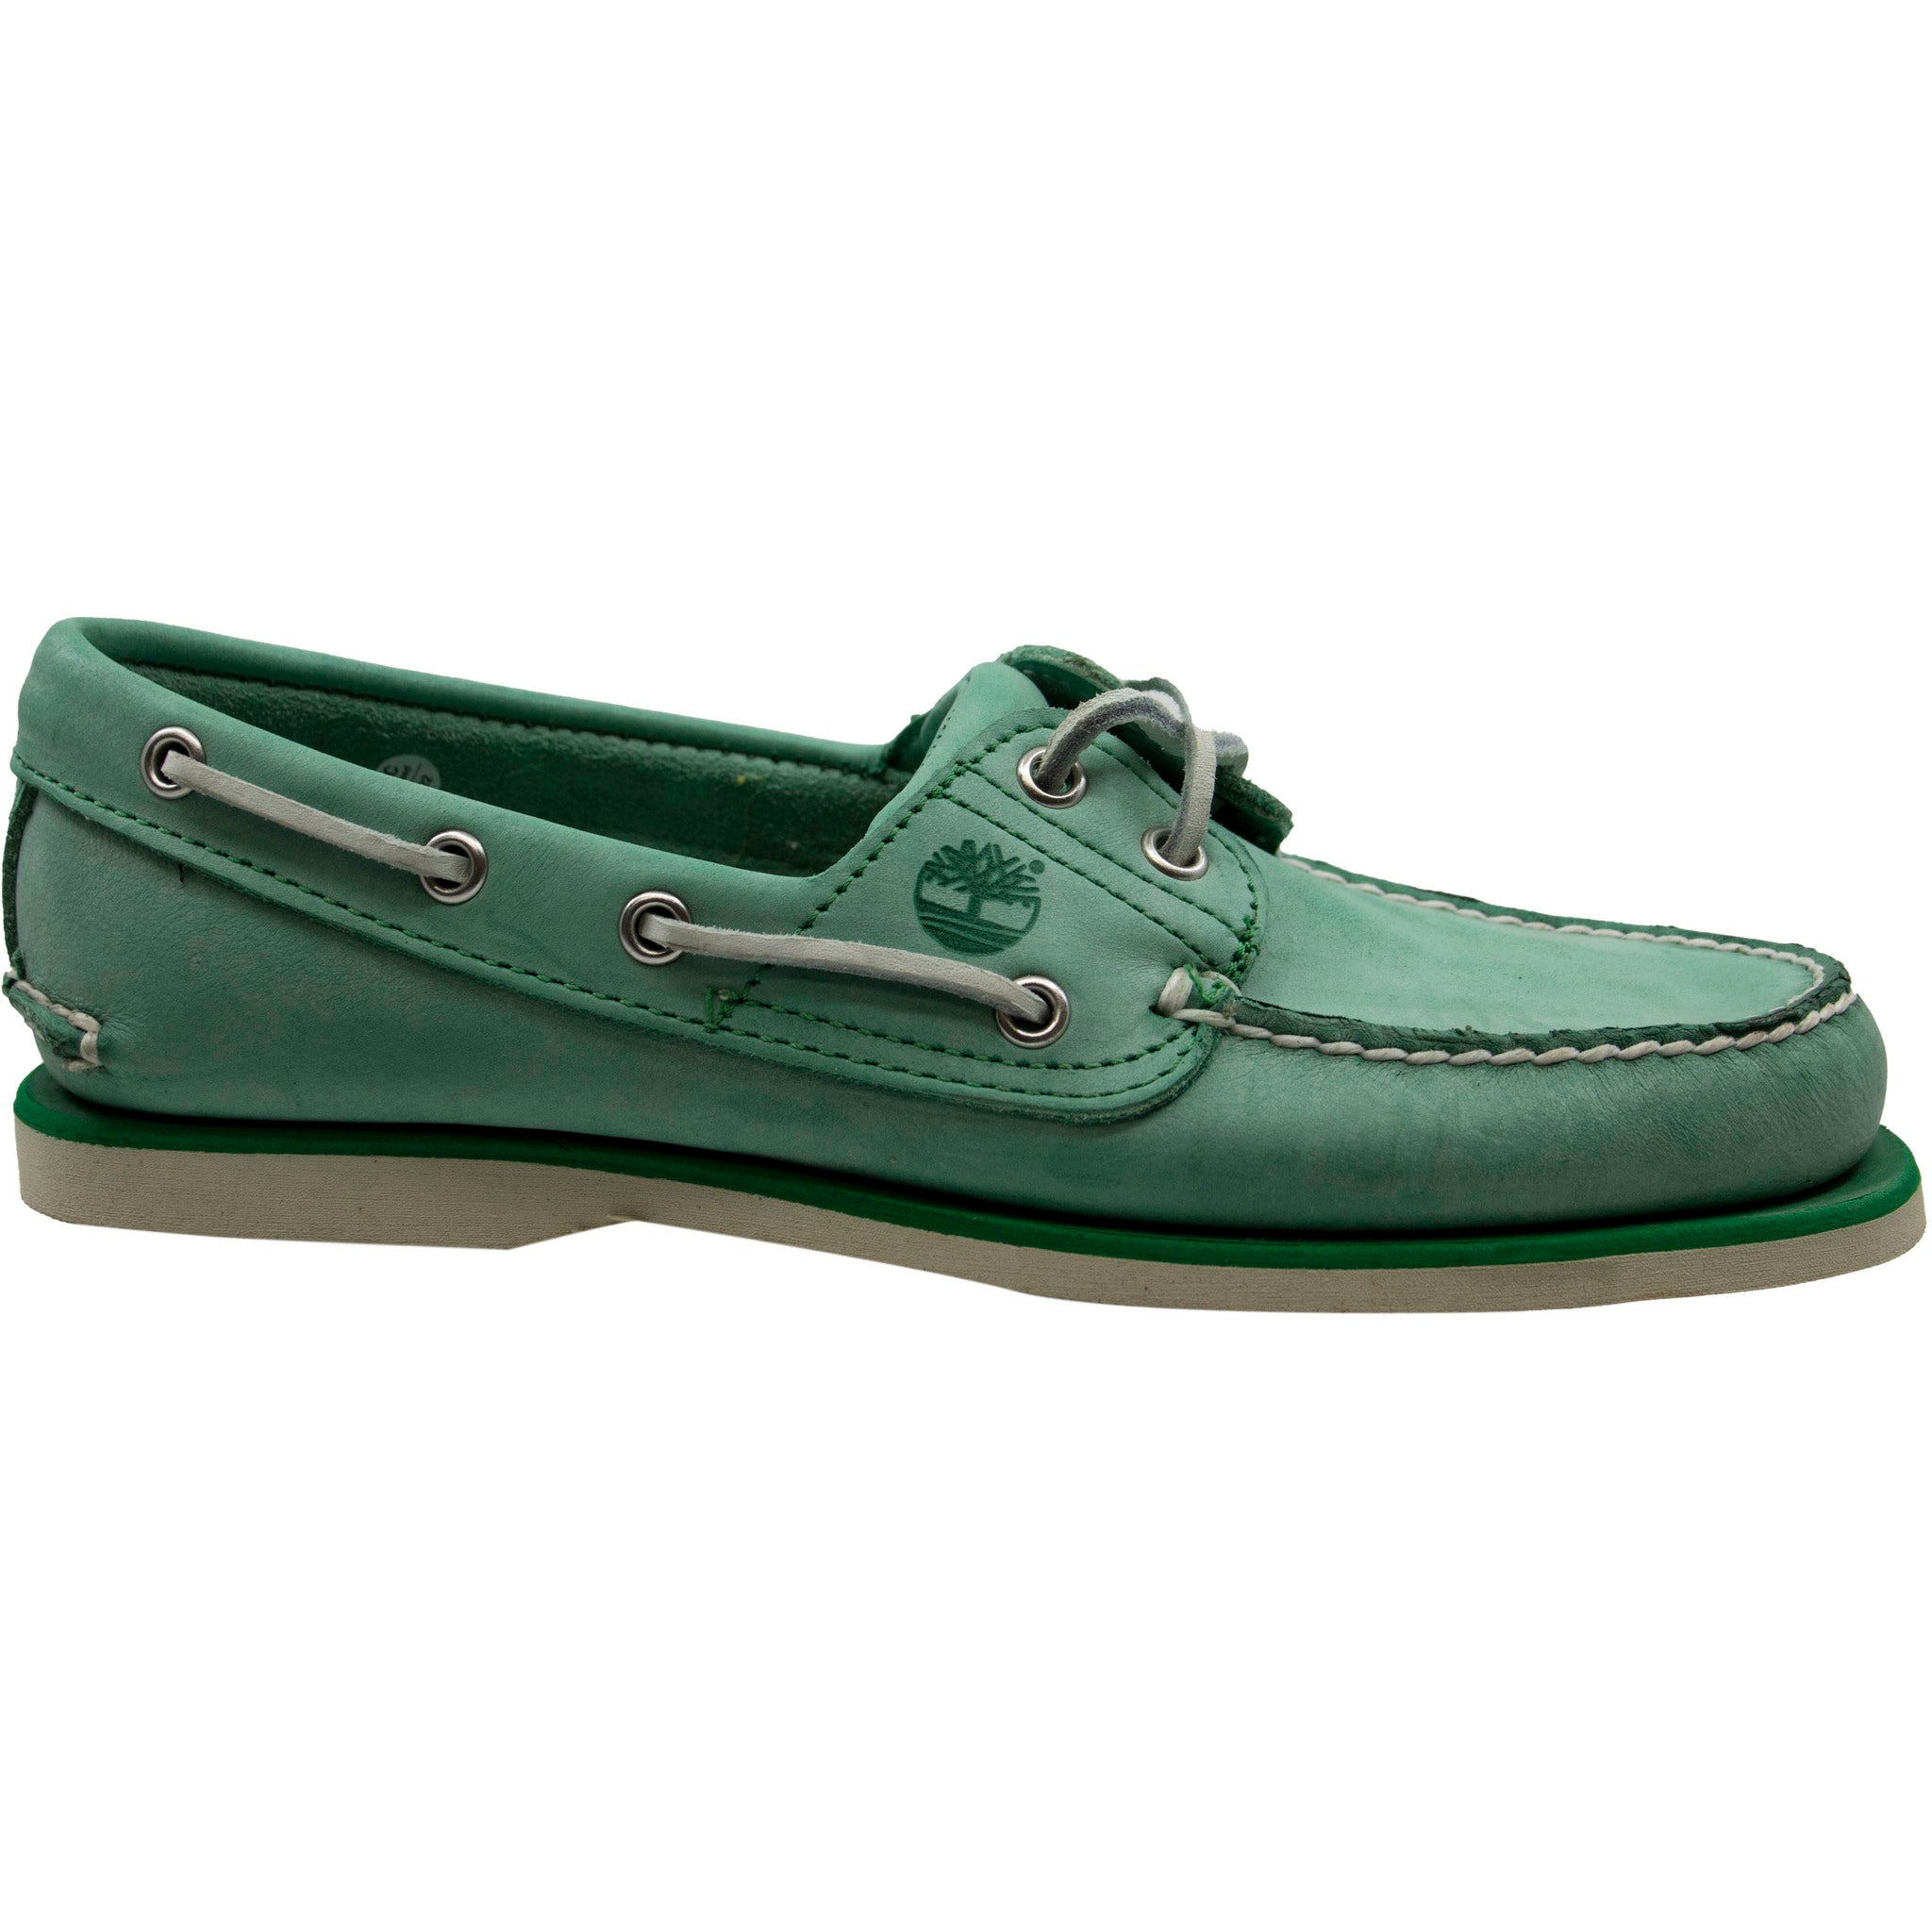 Timberland Classic 2 Eye Boat Green Leather Lace Up Mens Boat Shoes A1 ...